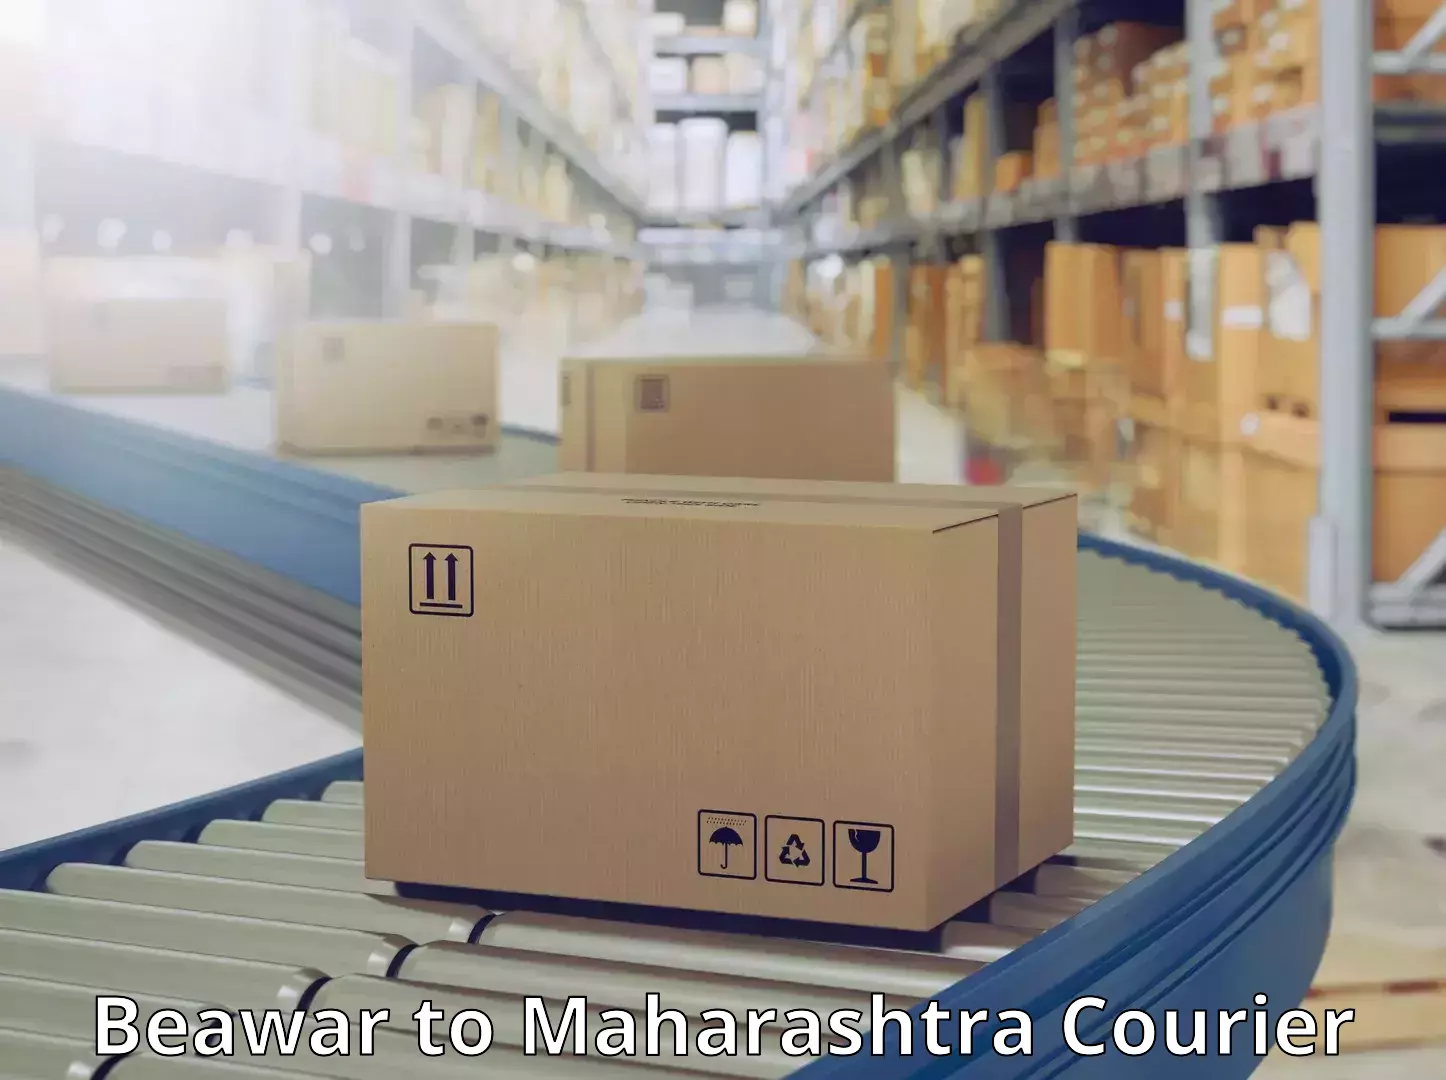 Round-the-clock parcel delivery Beawar to Maharashtra